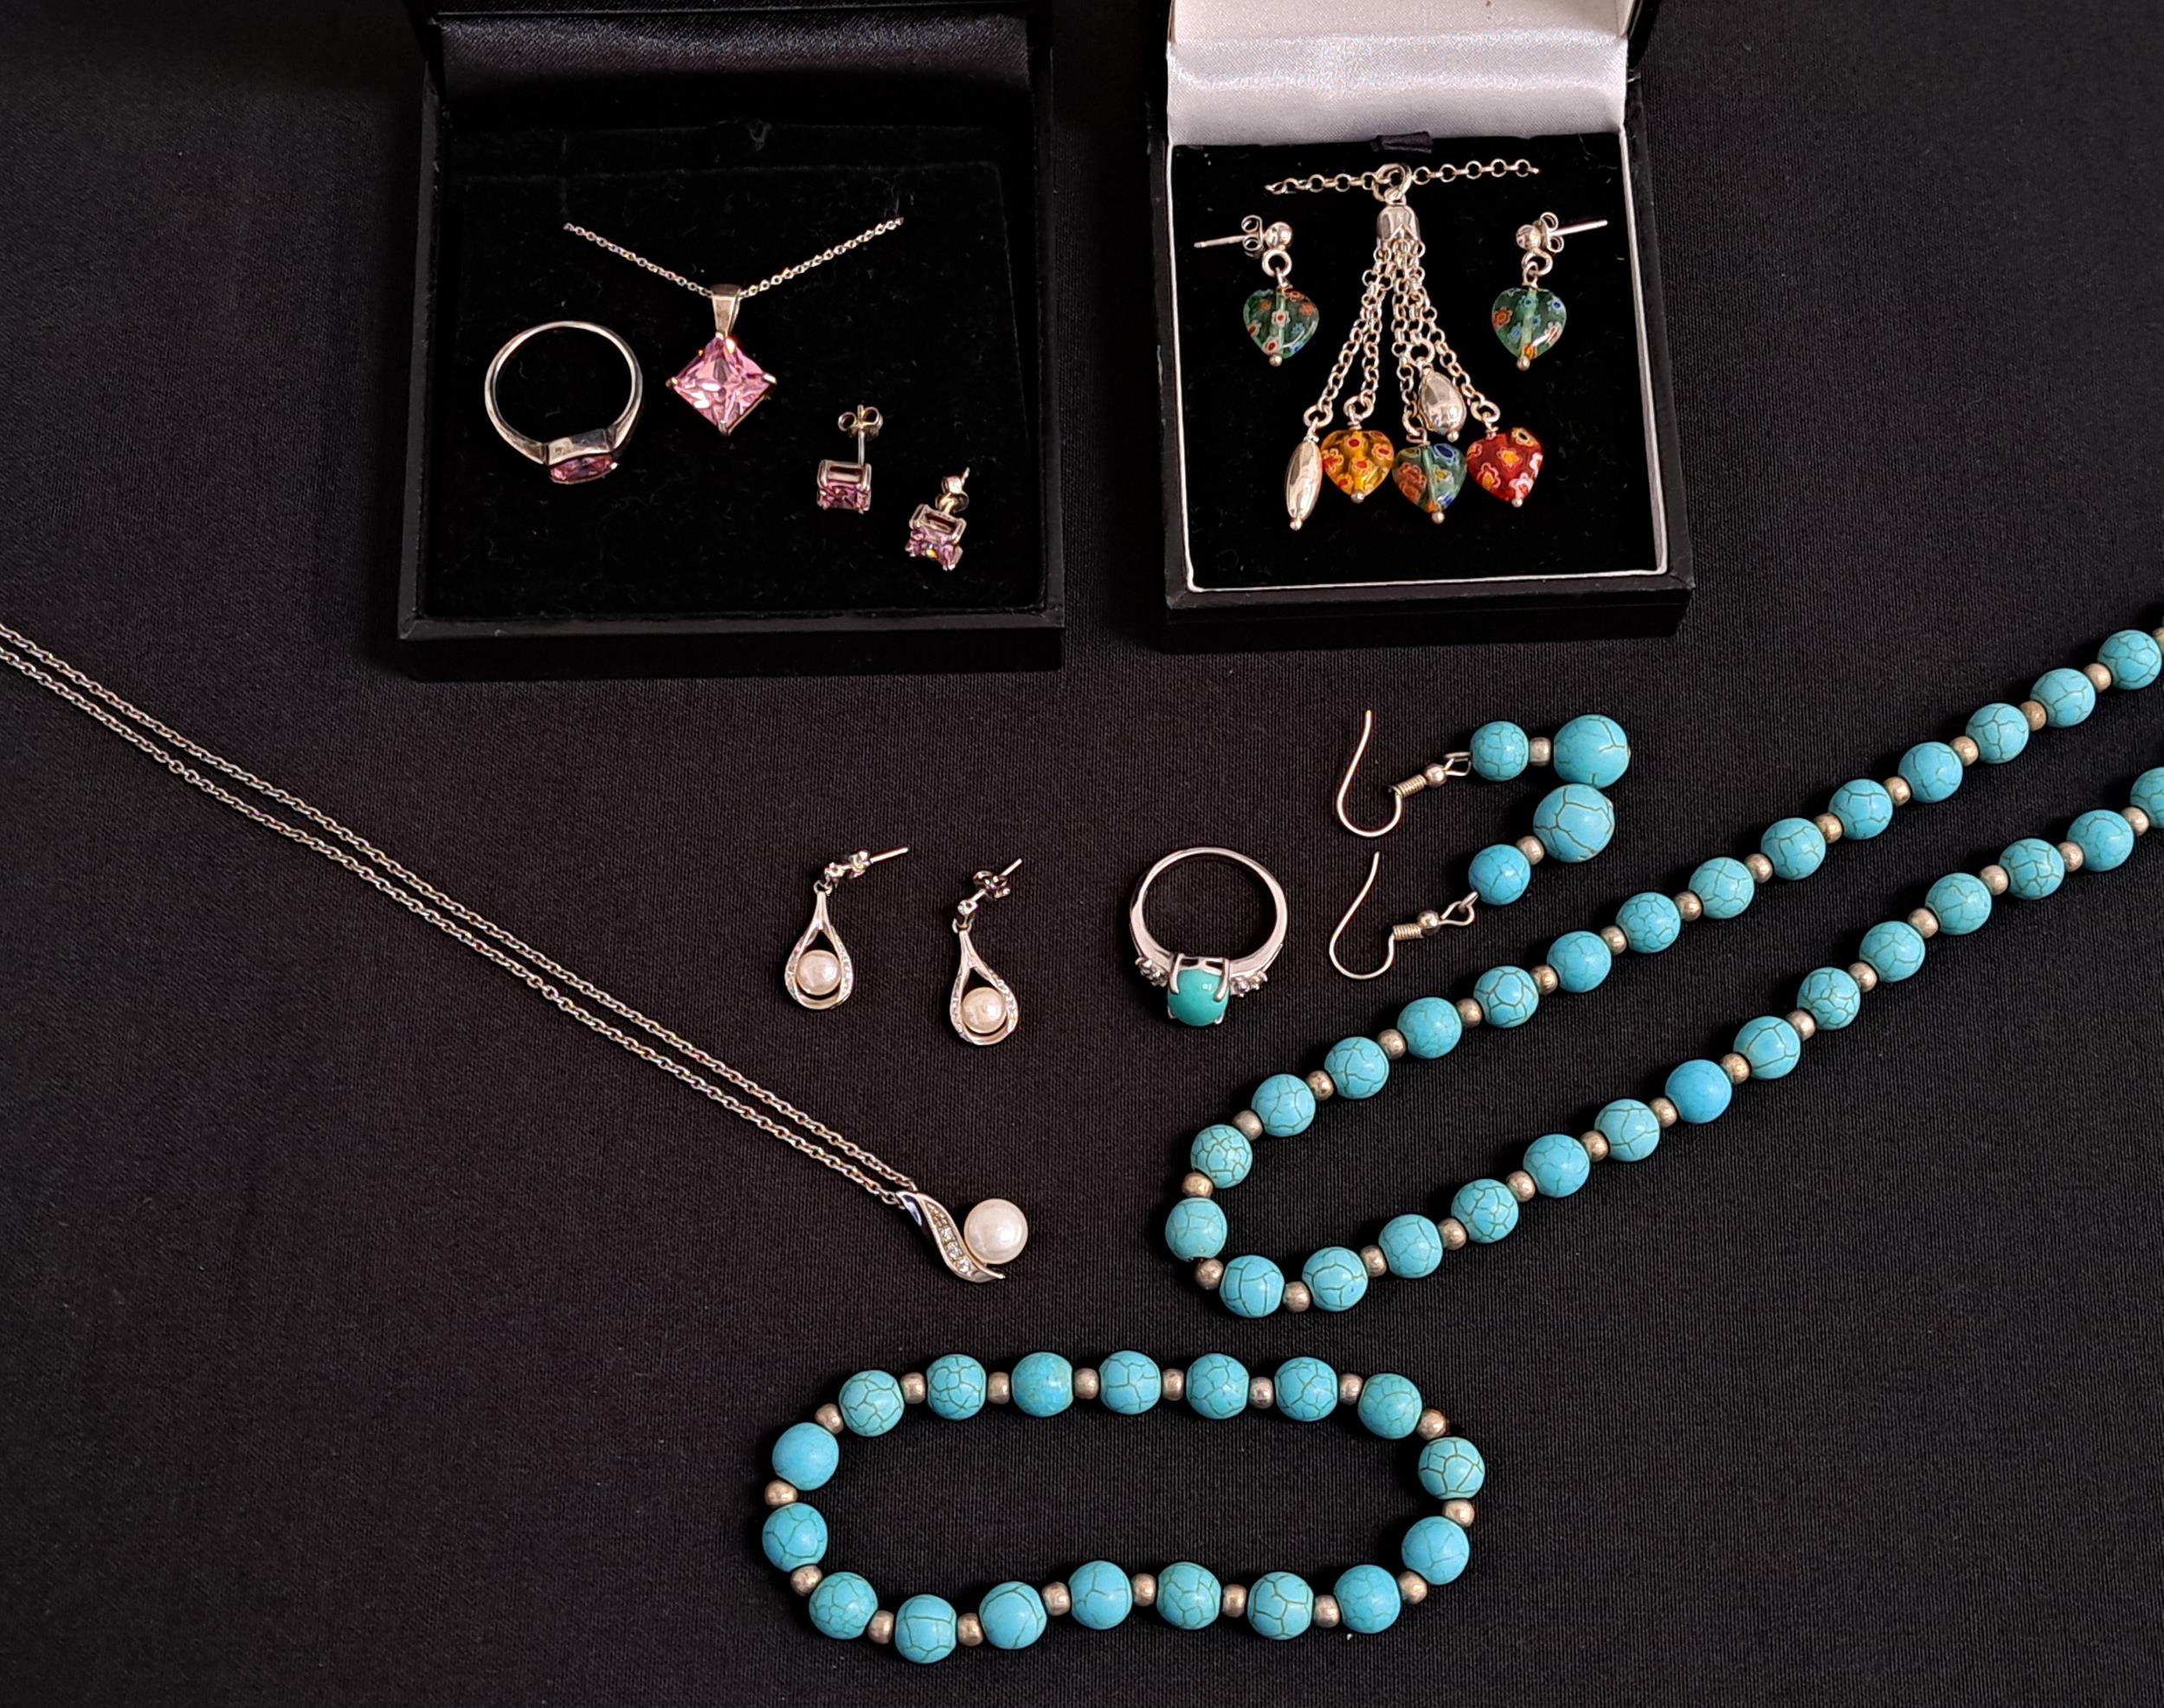 FOUR SUITES OF JEWELLERY comprising a turquoise bead necklace, bracelet, earrings and ring; a pink